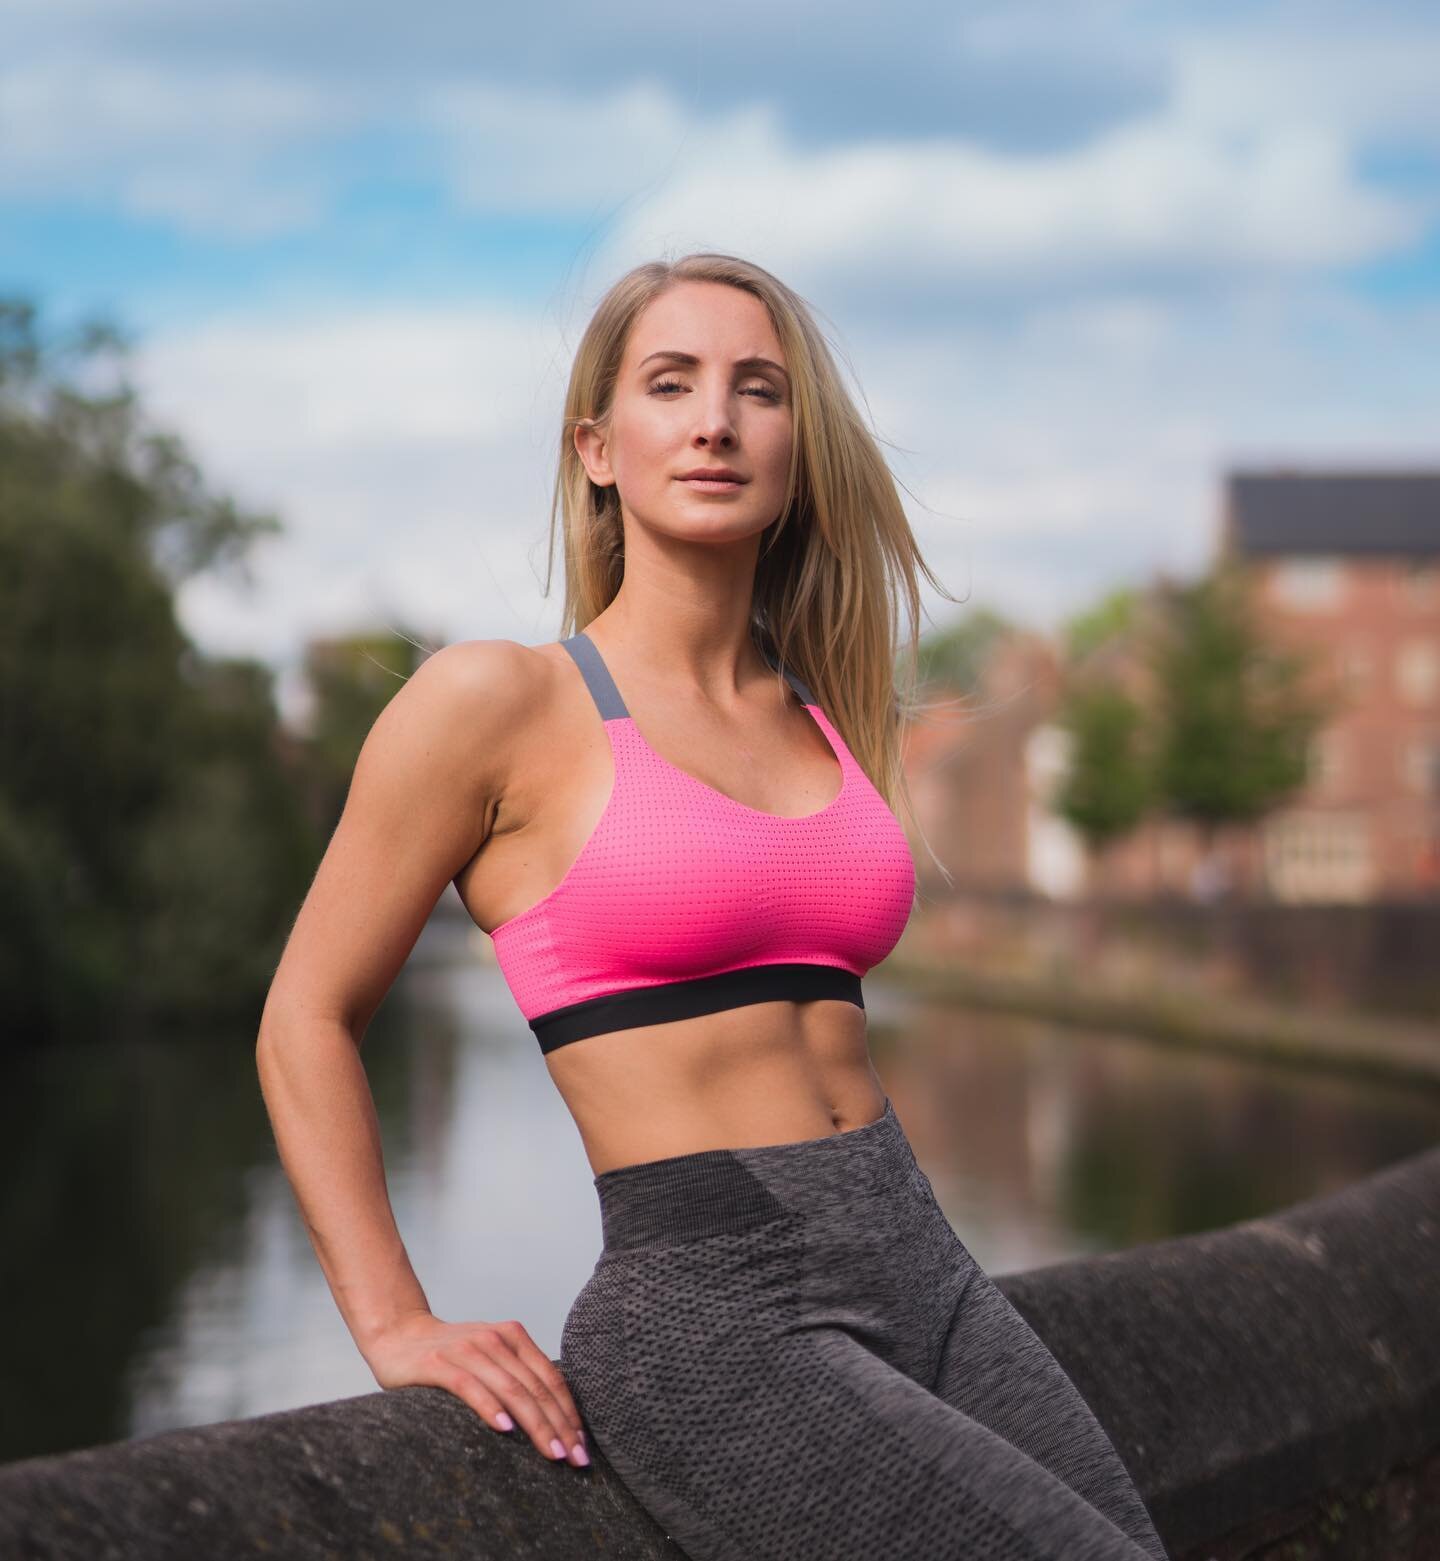 In need of content for your fitness or PT business? Get in touch for arrange a shoot today! Huge discounts on fitness shoots now available!

@theportraitmission @lensminds @uk.portraits @dopeports @london.portraits @weshoothumans @ourportraitsdays @p